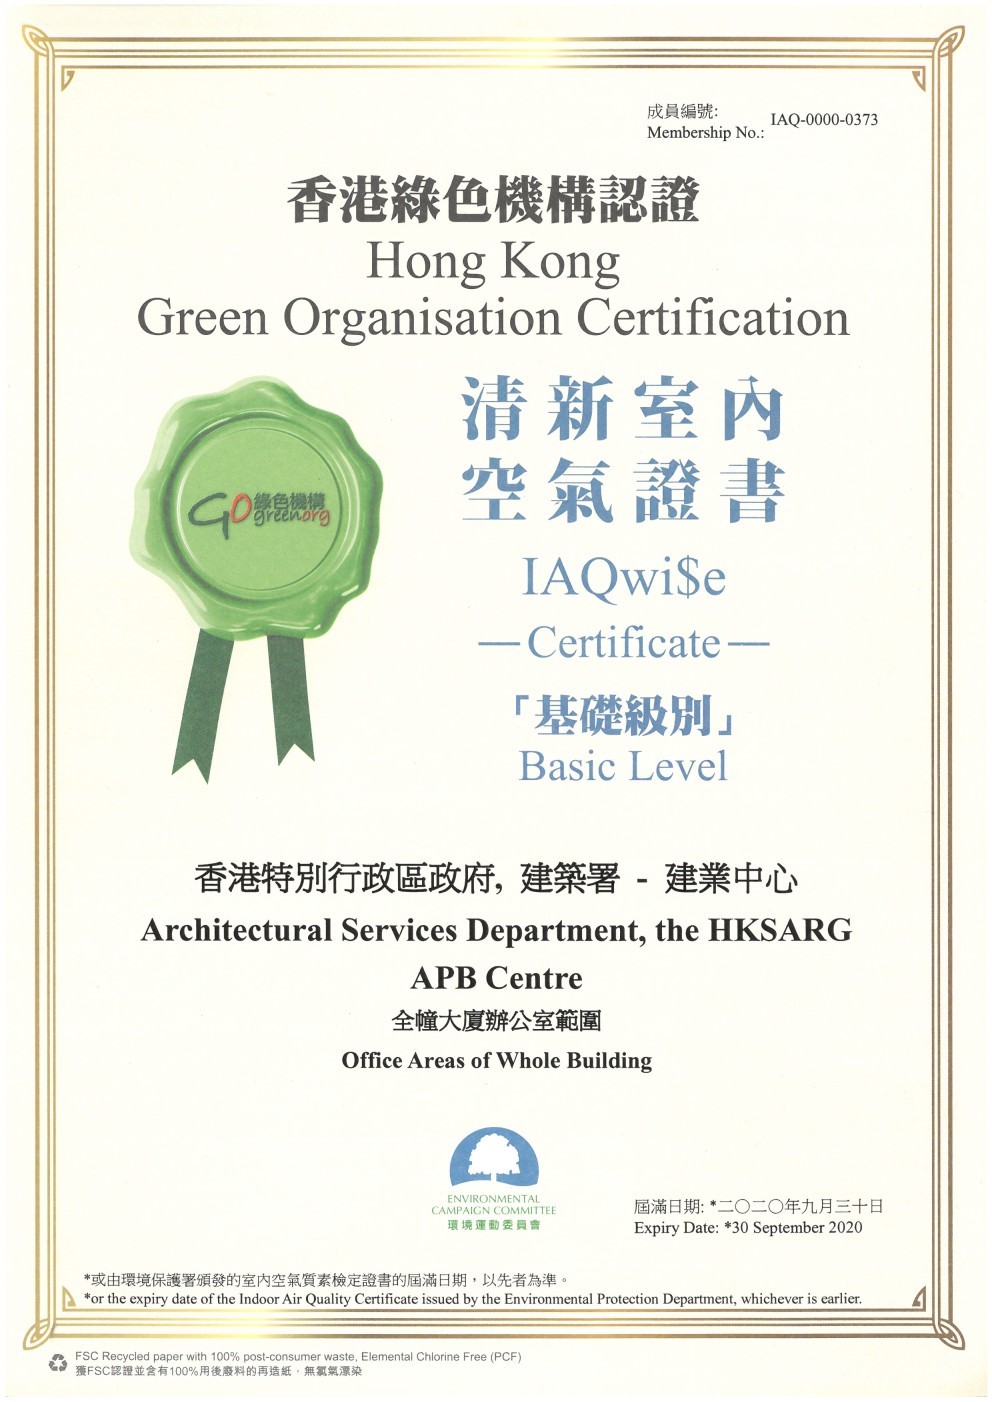 The APB Centre and QGO both received the 'Basic Level' IAQwi$e Certificates